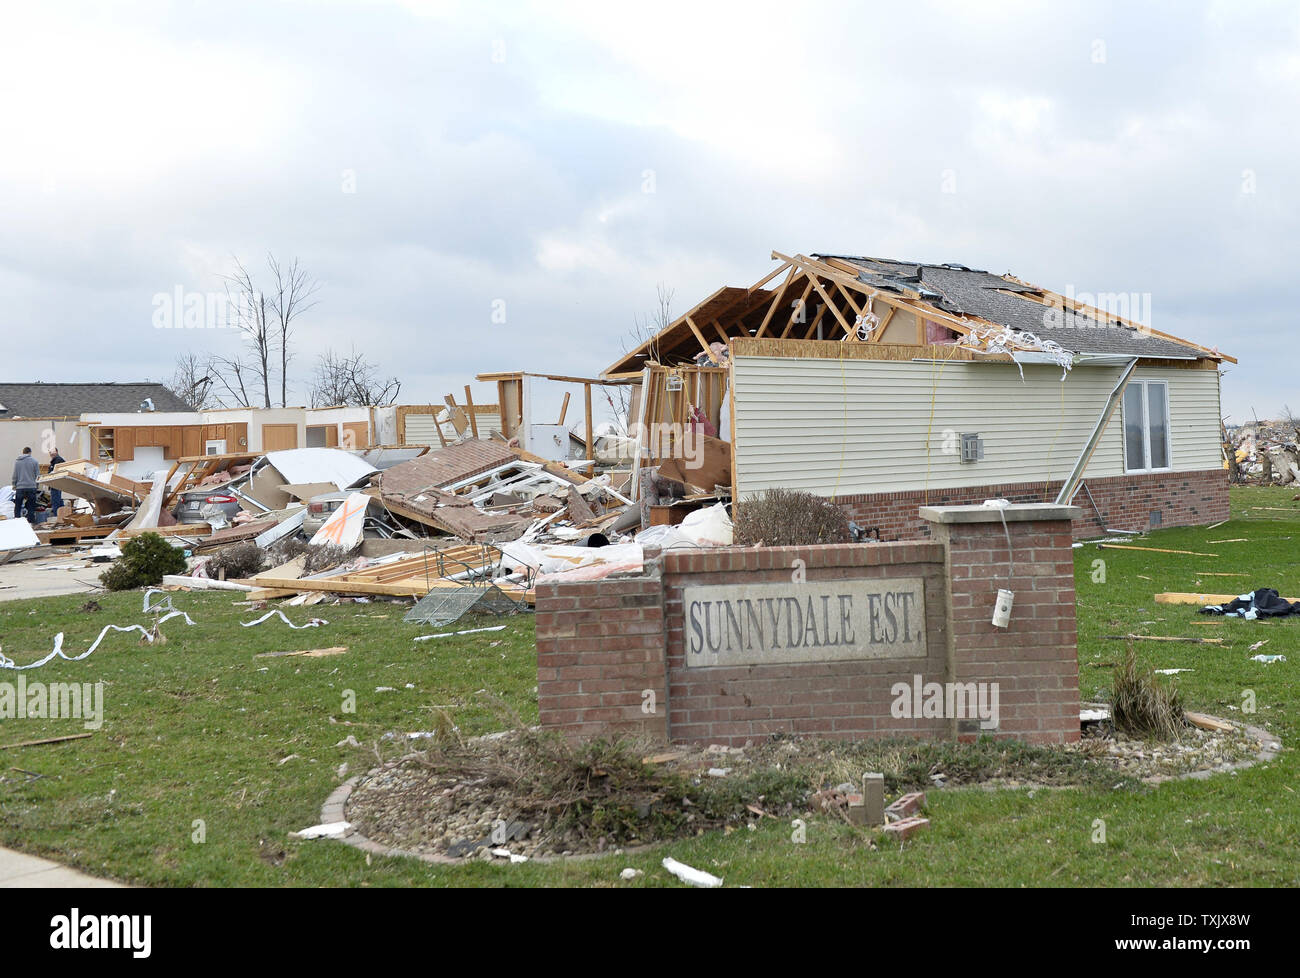 The remnants of a house stands in Washington, Illinois on November 18, 2013. Six people died and hundreds of homes were destroyed in Illinois as 81 tornadoes were sighted on November 17 throughout 12 midwest states including the EF4 tornado that struck Washington, Illinois.     UPI/Brian Kersey Stock Photo